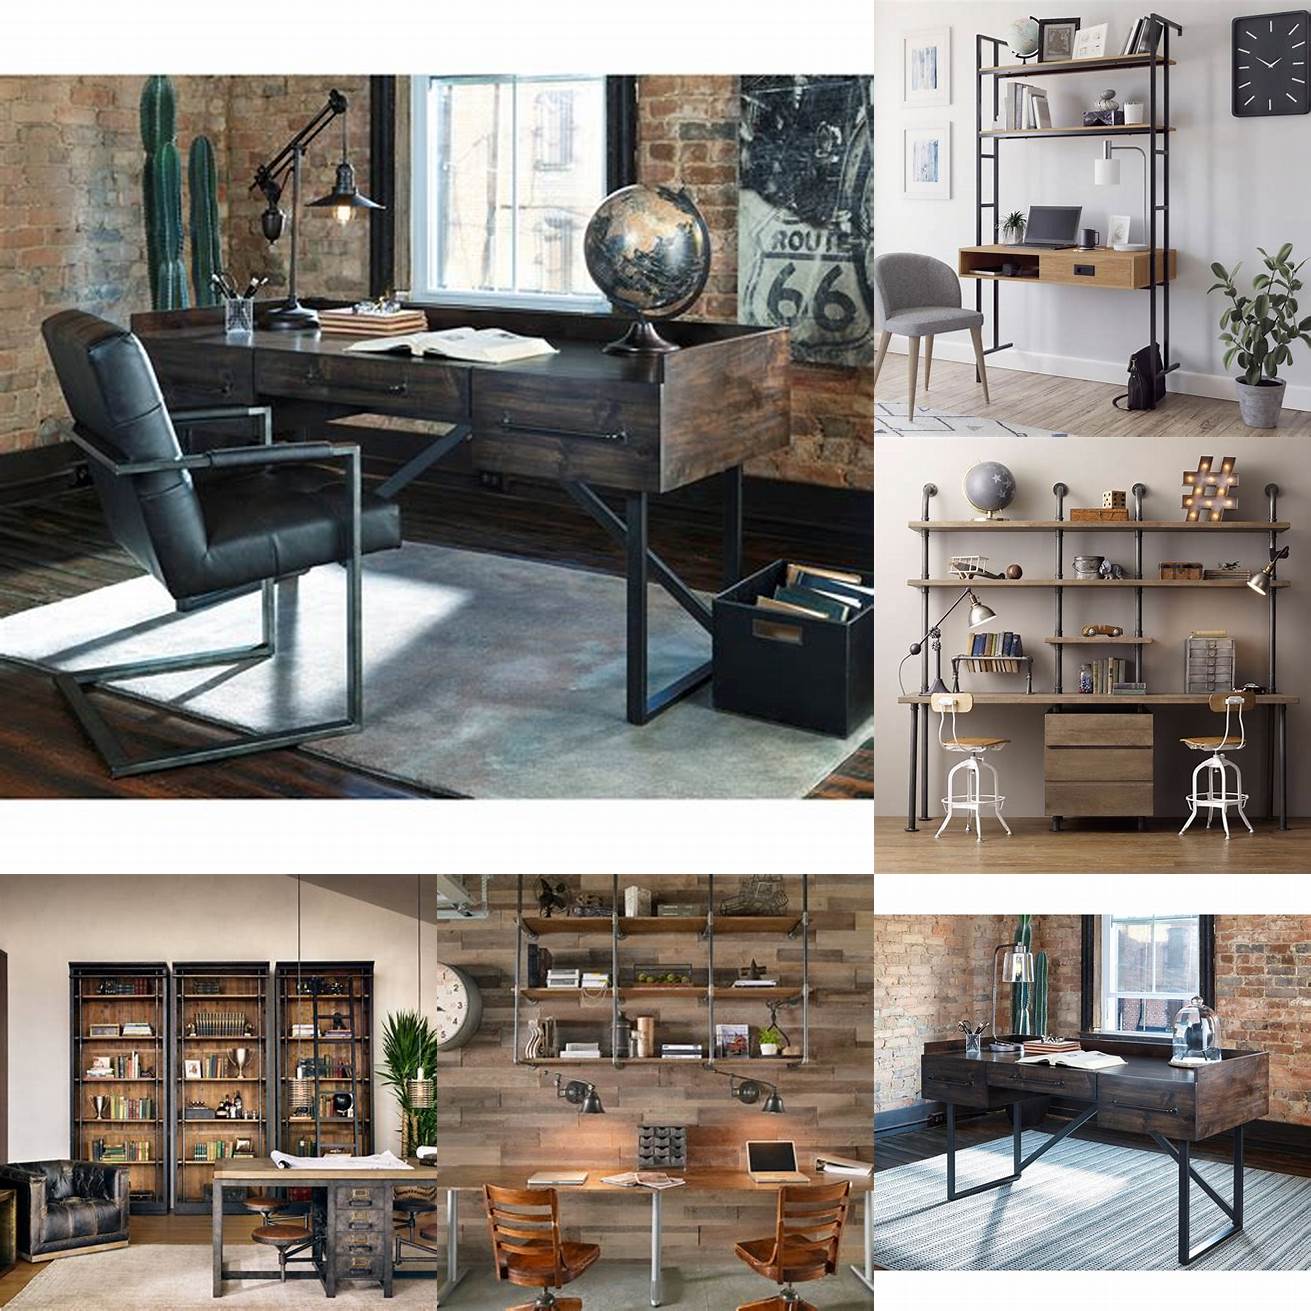 Image of an industrial style home office with a metal desk and shelving unit